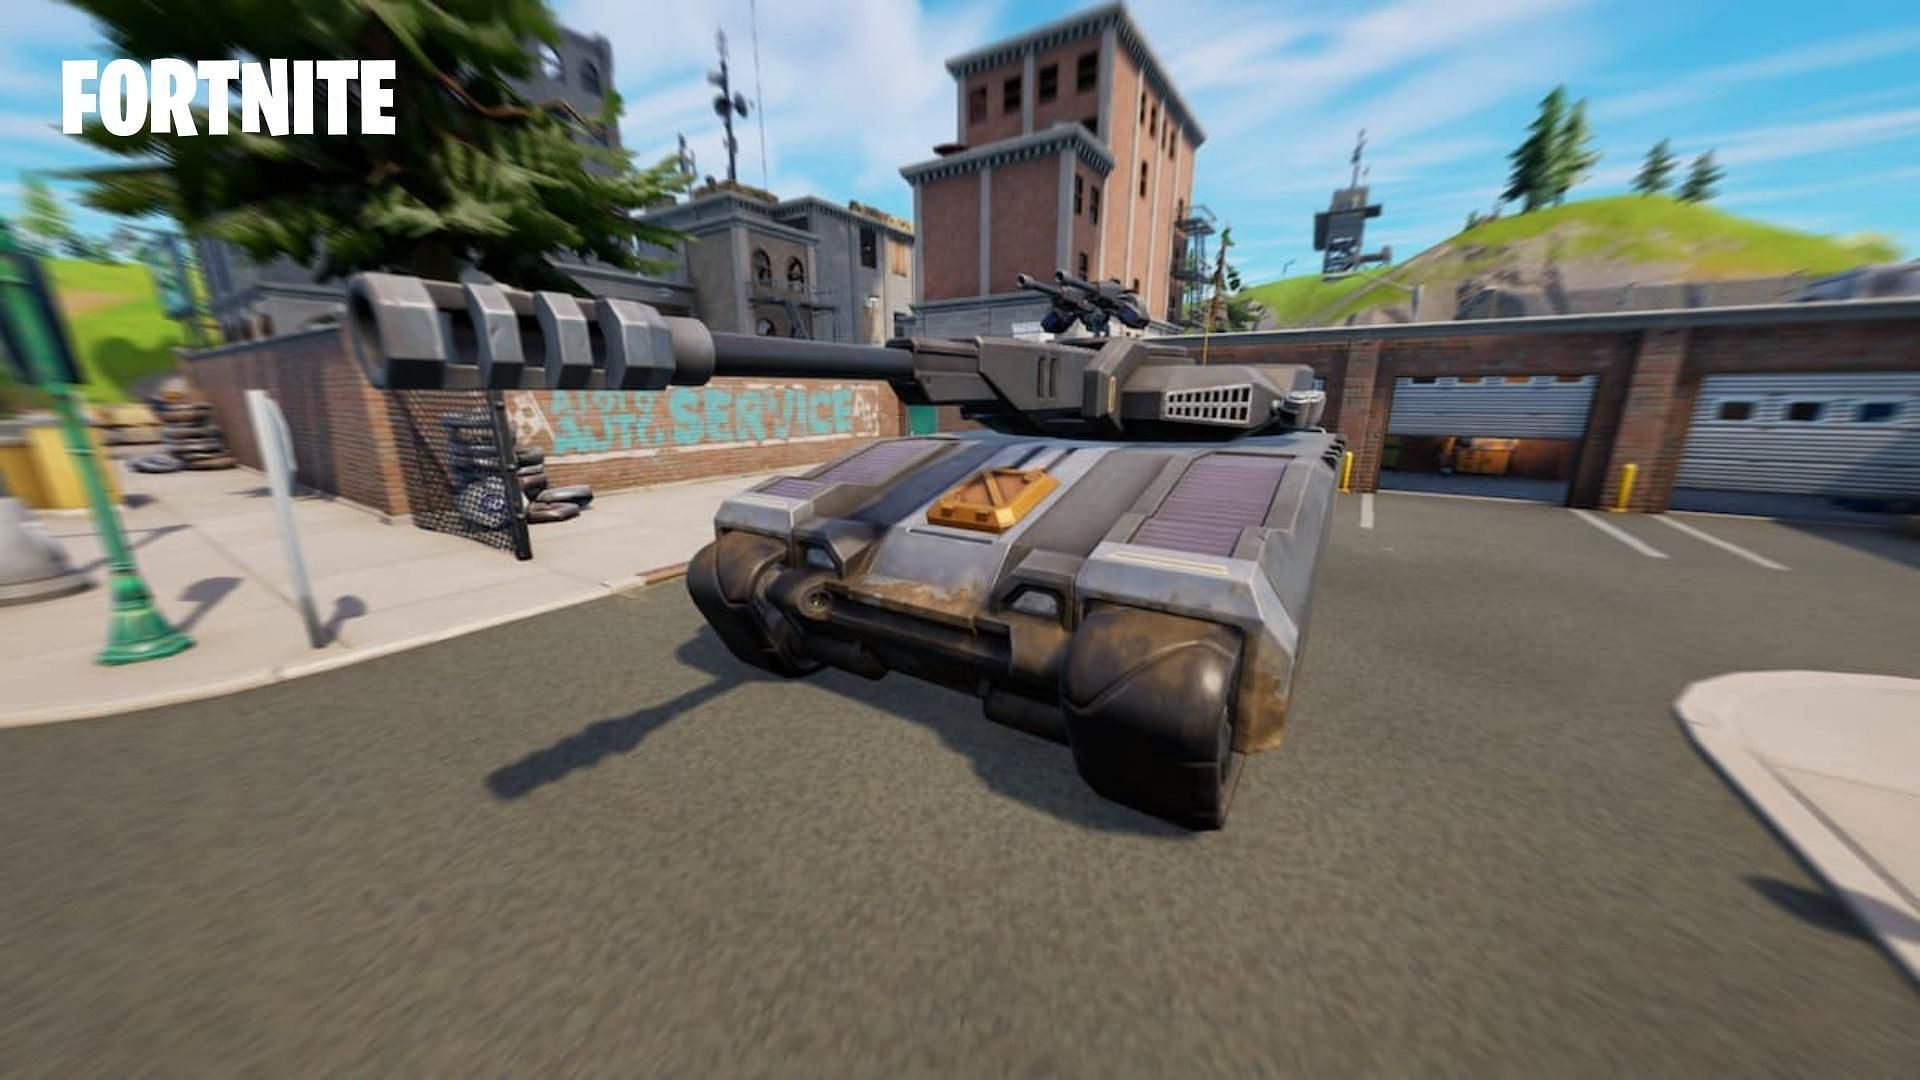 Tanks have become a player&#039;s choice vehicle to wreak havoc in the looped island (Image via Sportskeeda)